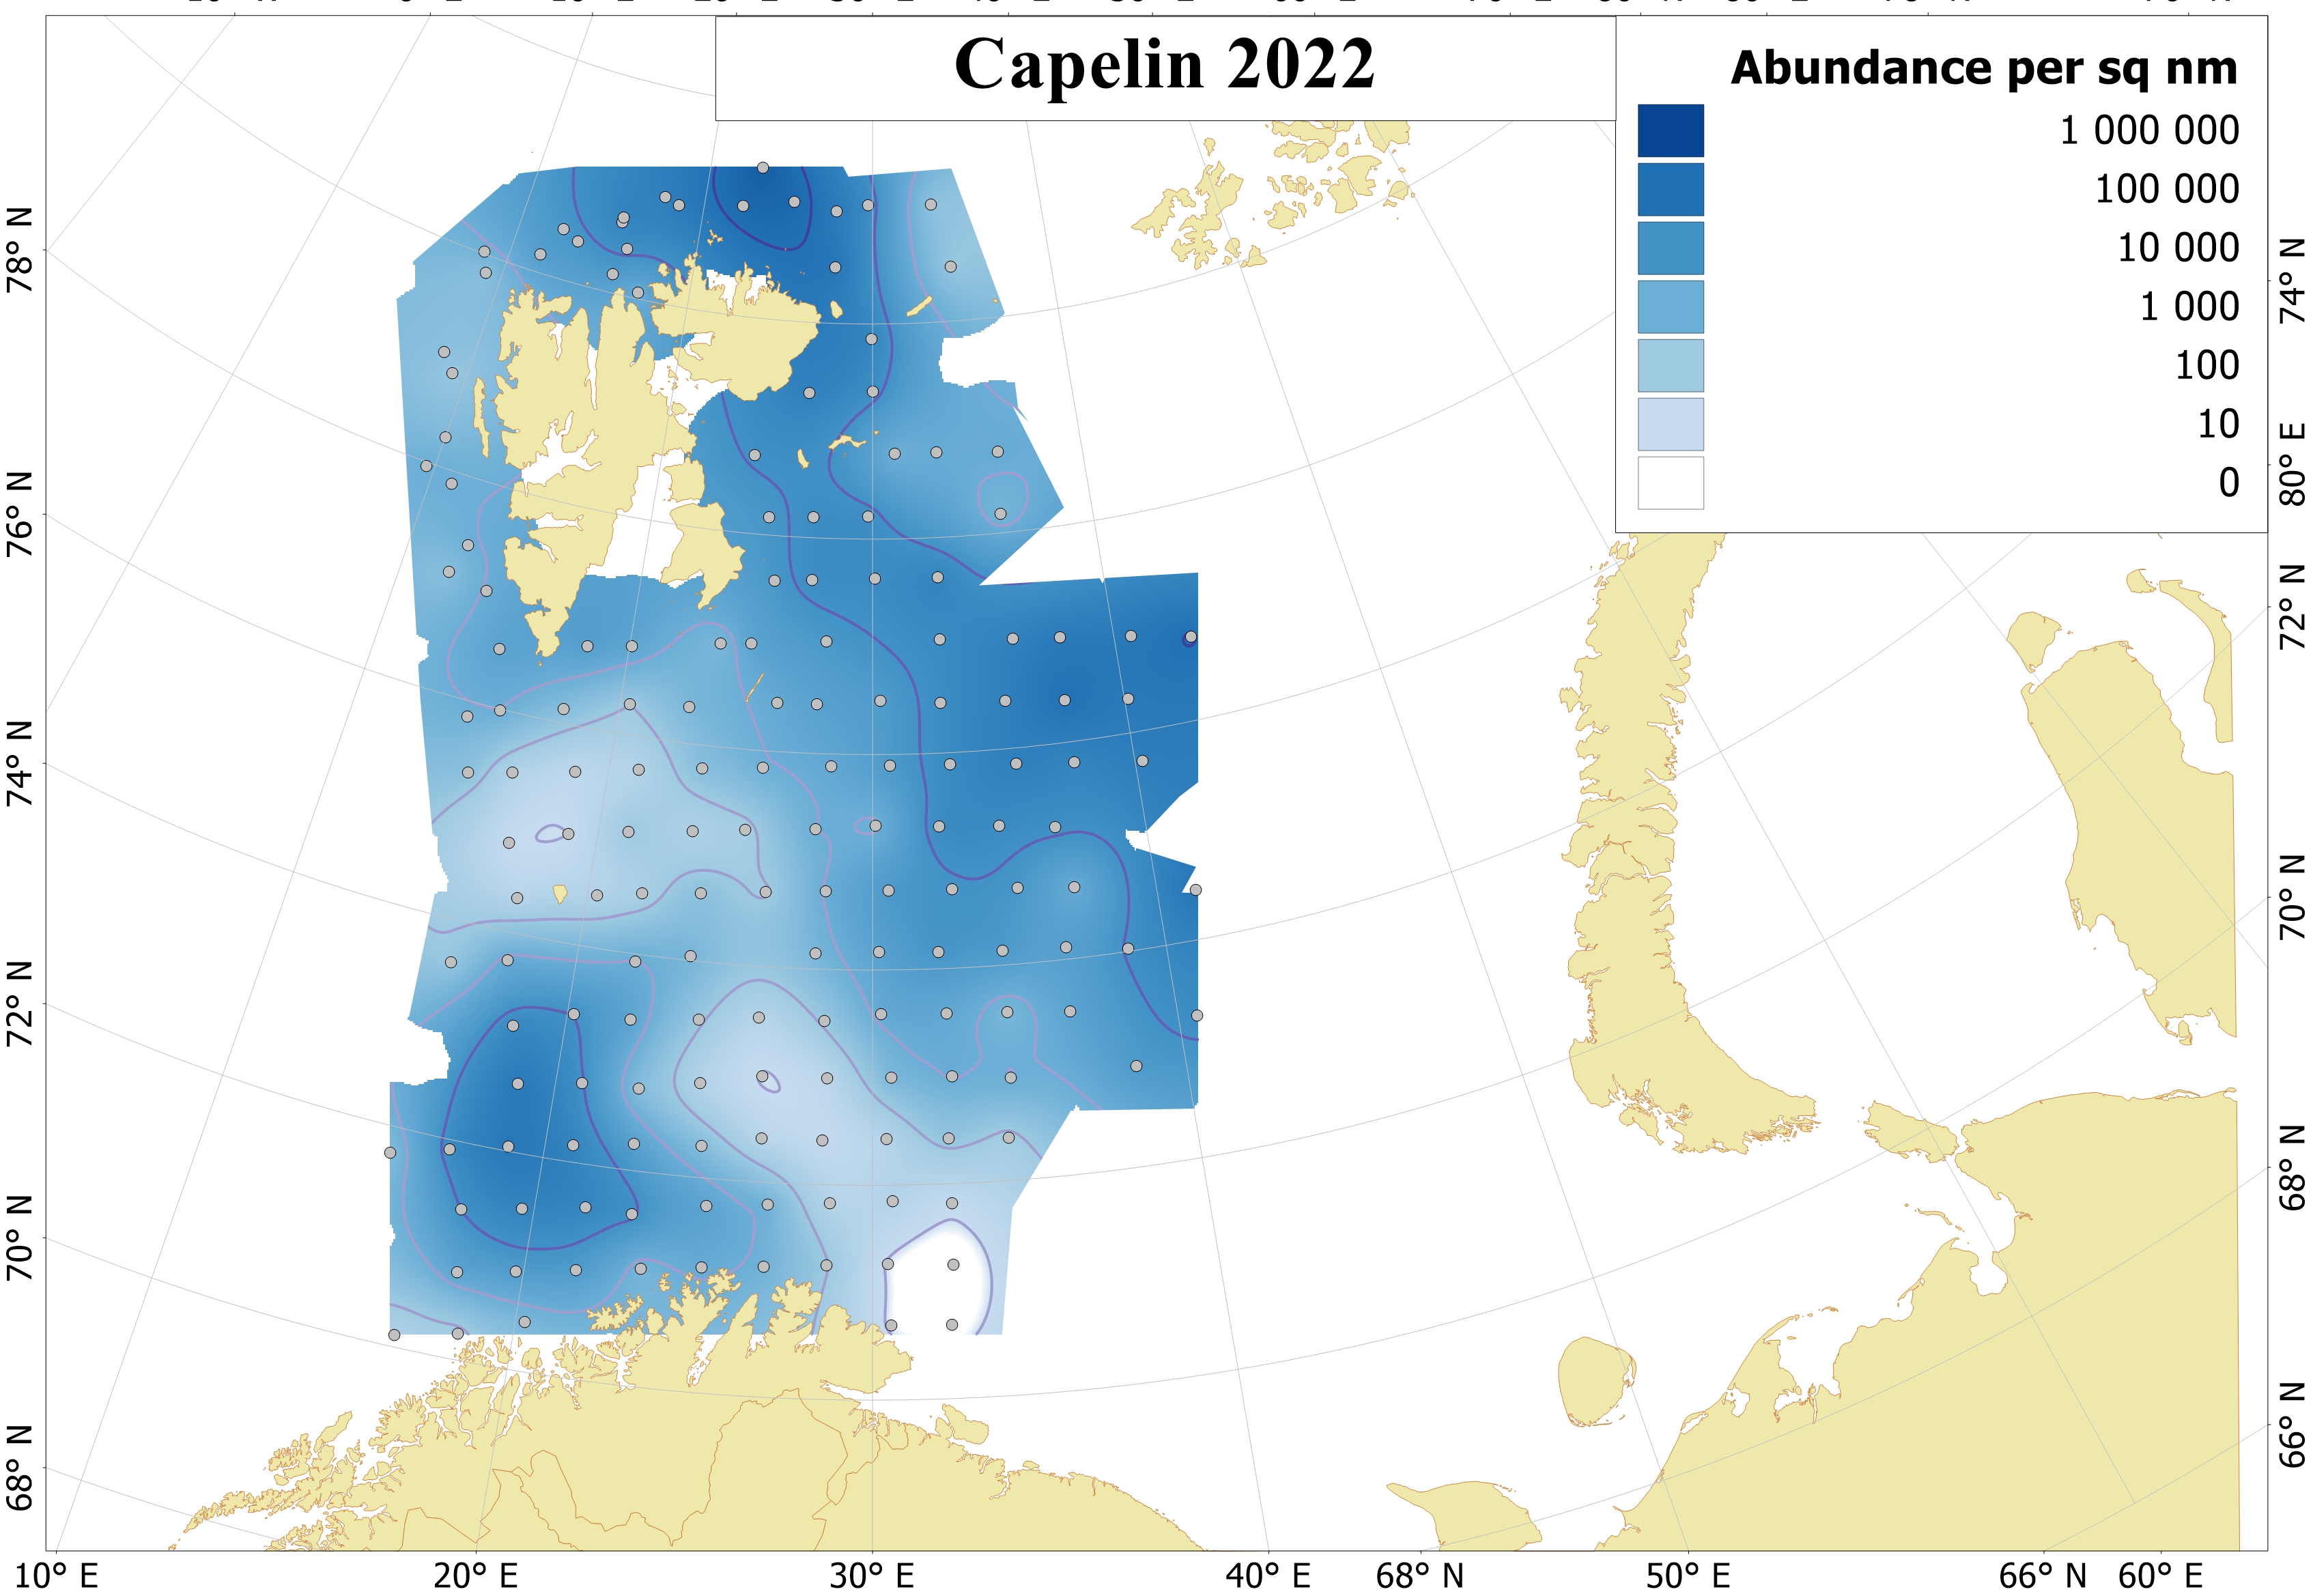 Ch 6 Distribution of 0-group capelin 2022